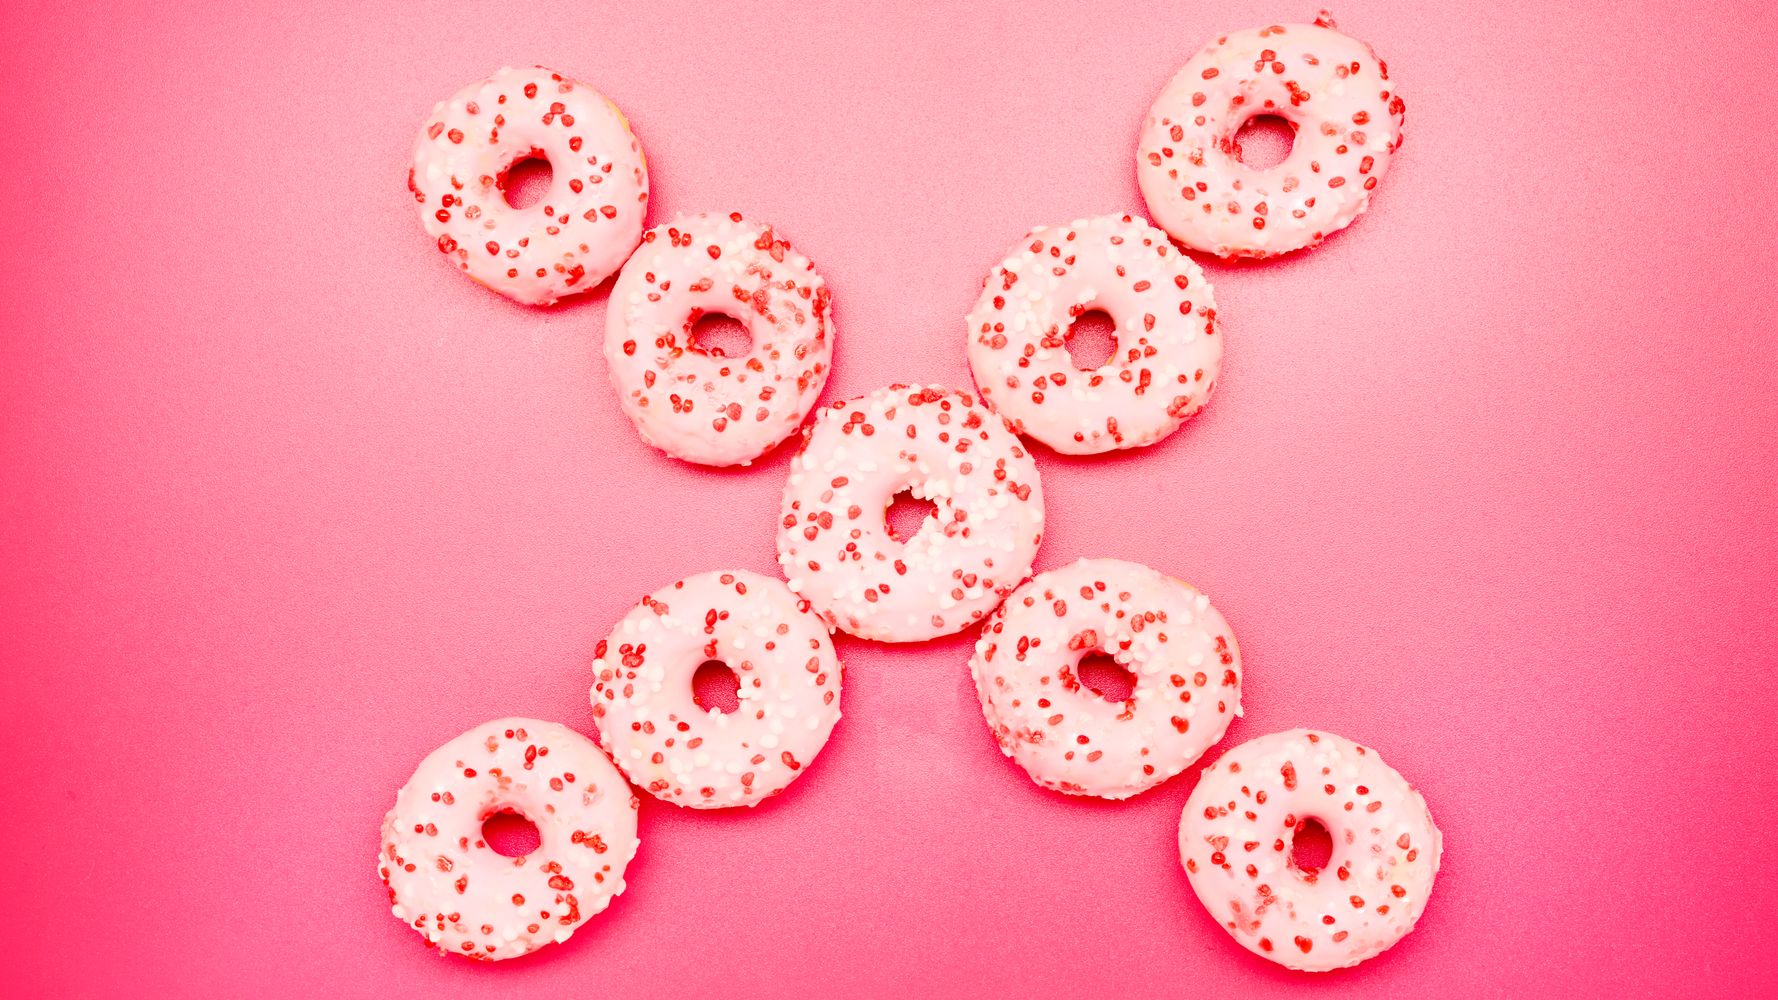 Weight Shaming (Not Free Doughnuts) Is The Real Health Threat. Here